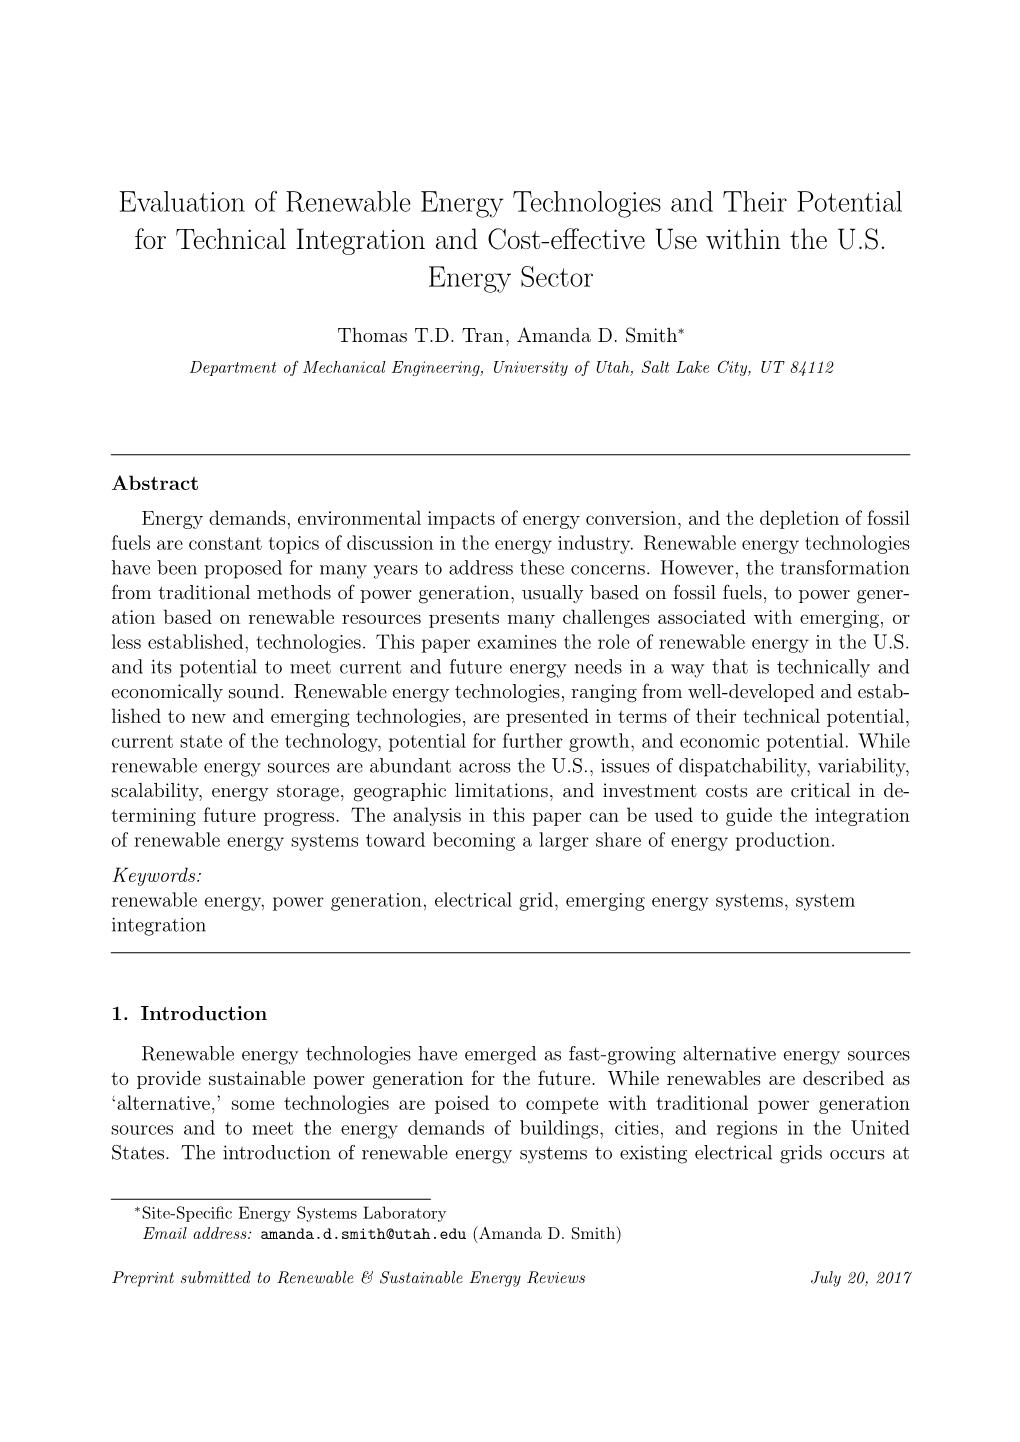 Evaluation of Renewable Energy Technologies and Their Potential for Technical Integration and Cost-Eﬀective Use Within the U.S